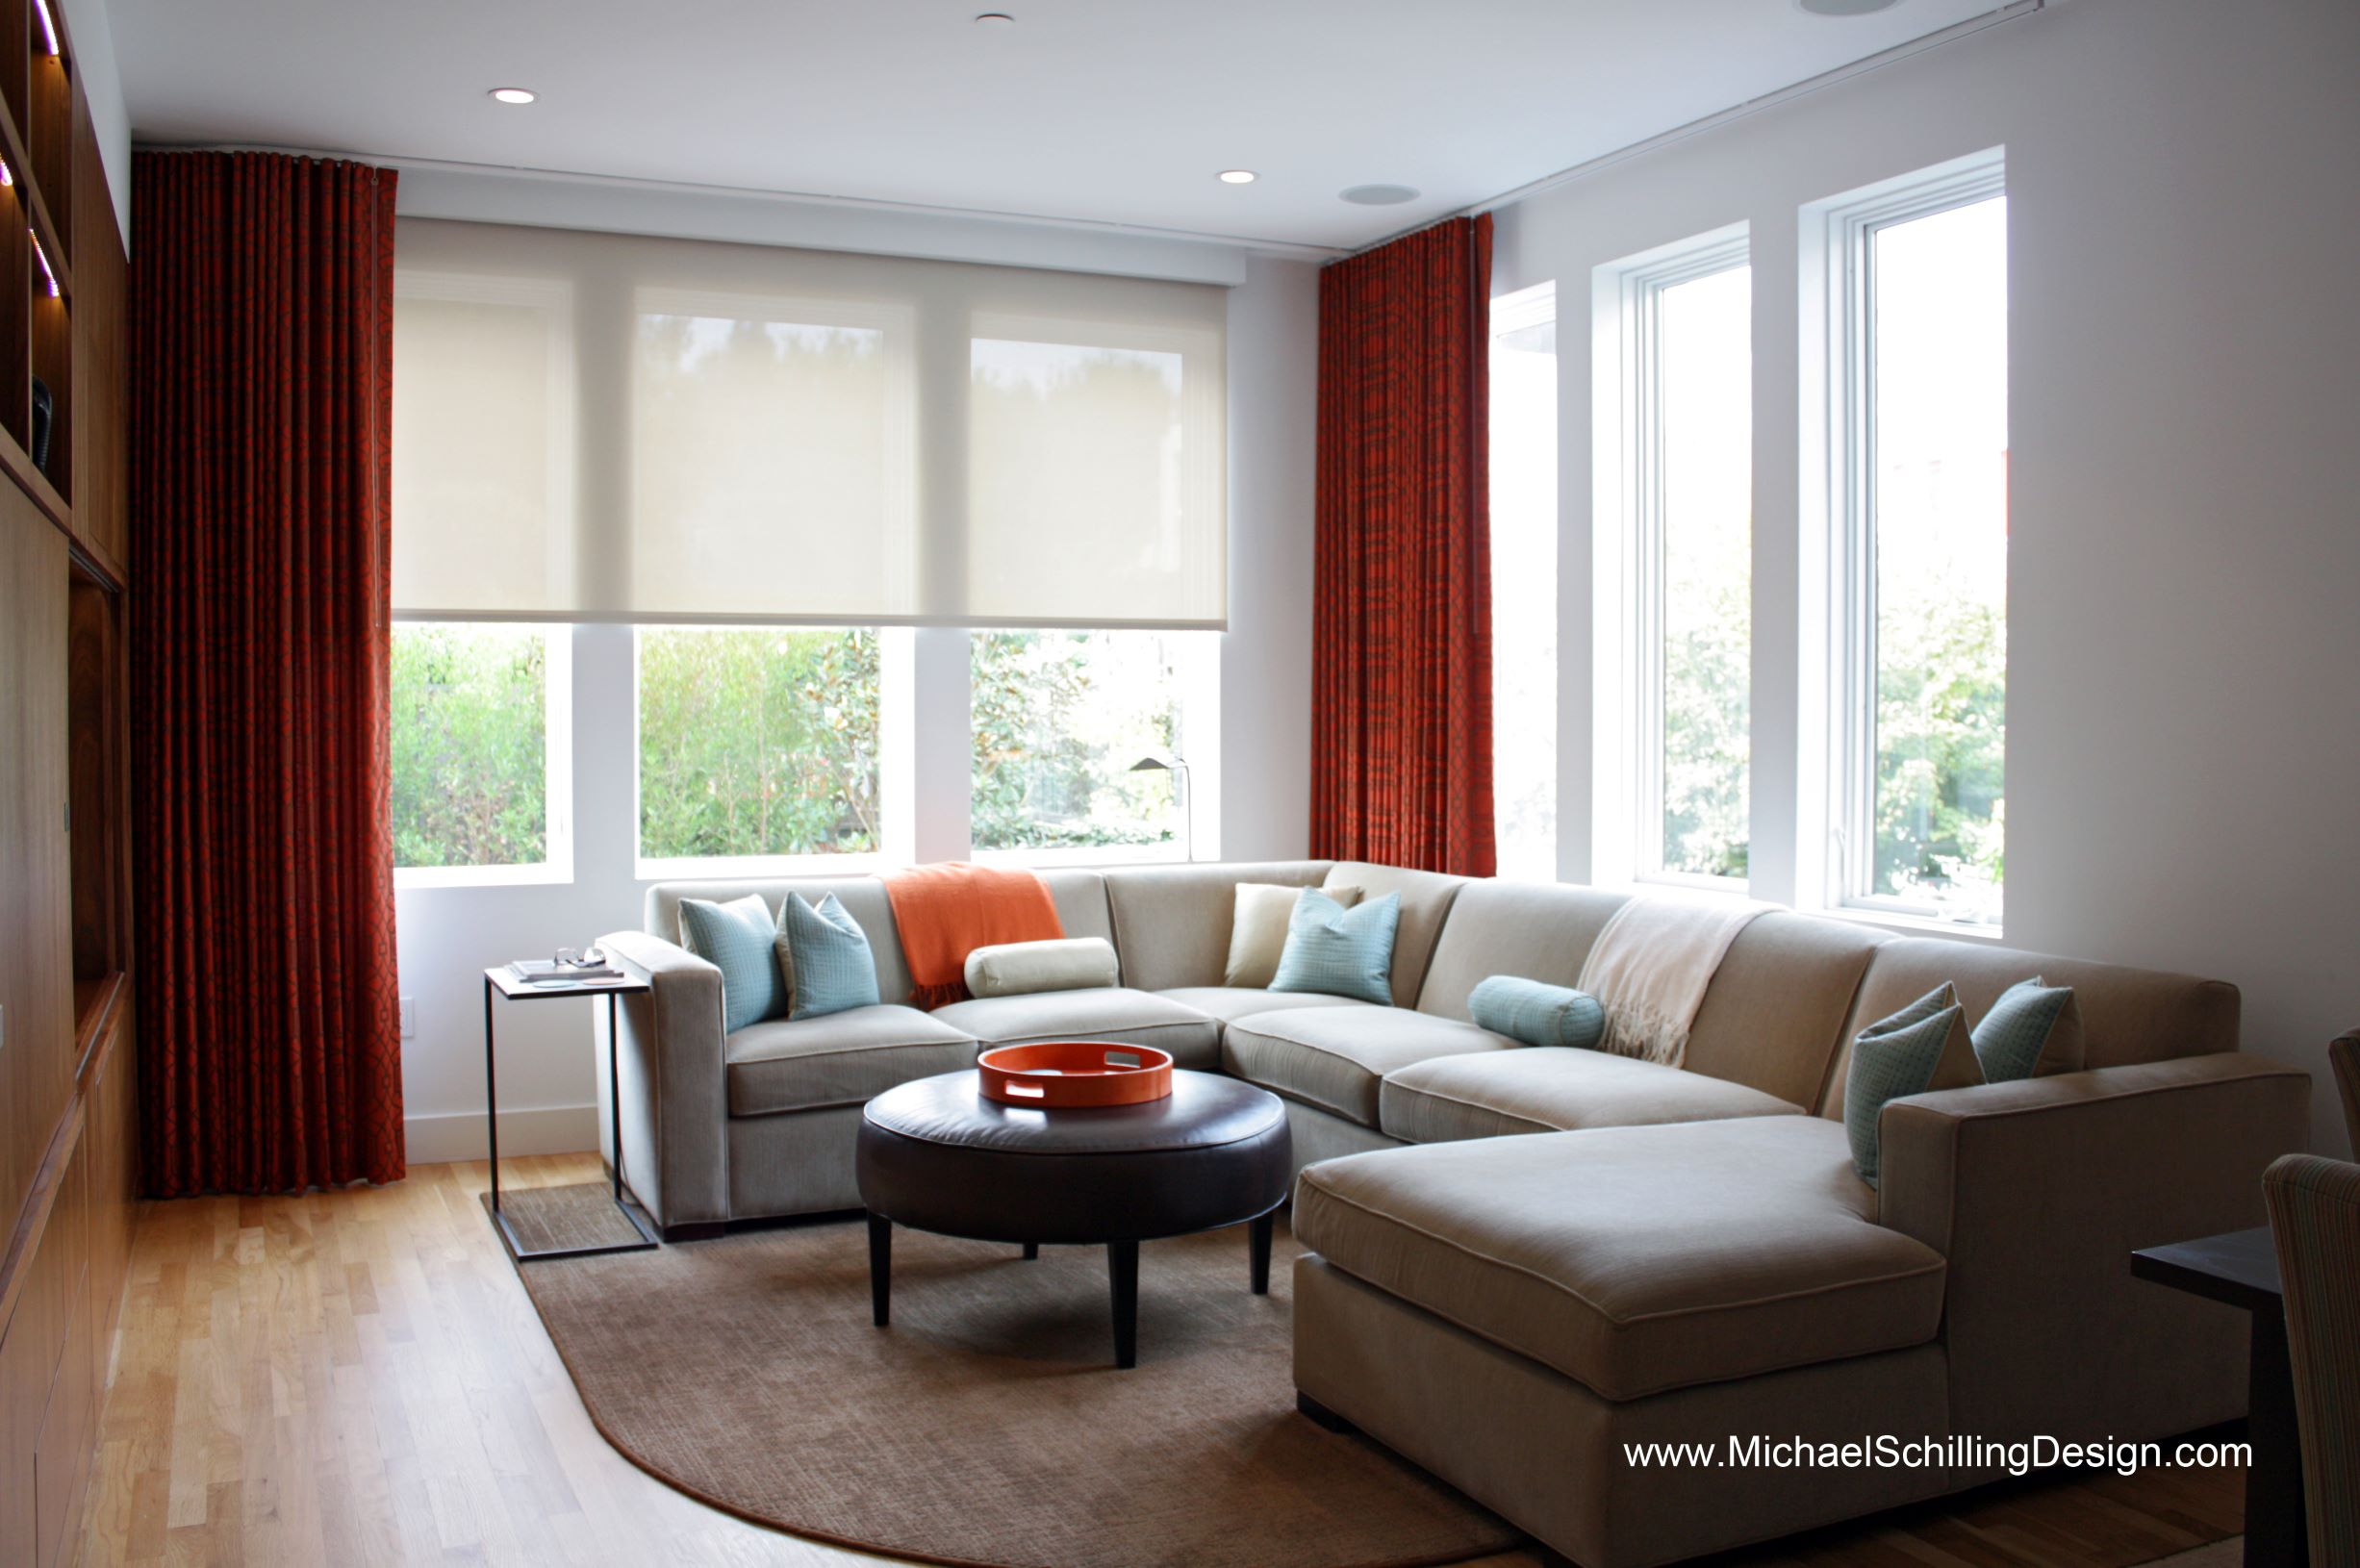 Lutron automated shades with designer draperies finish off any room with style.